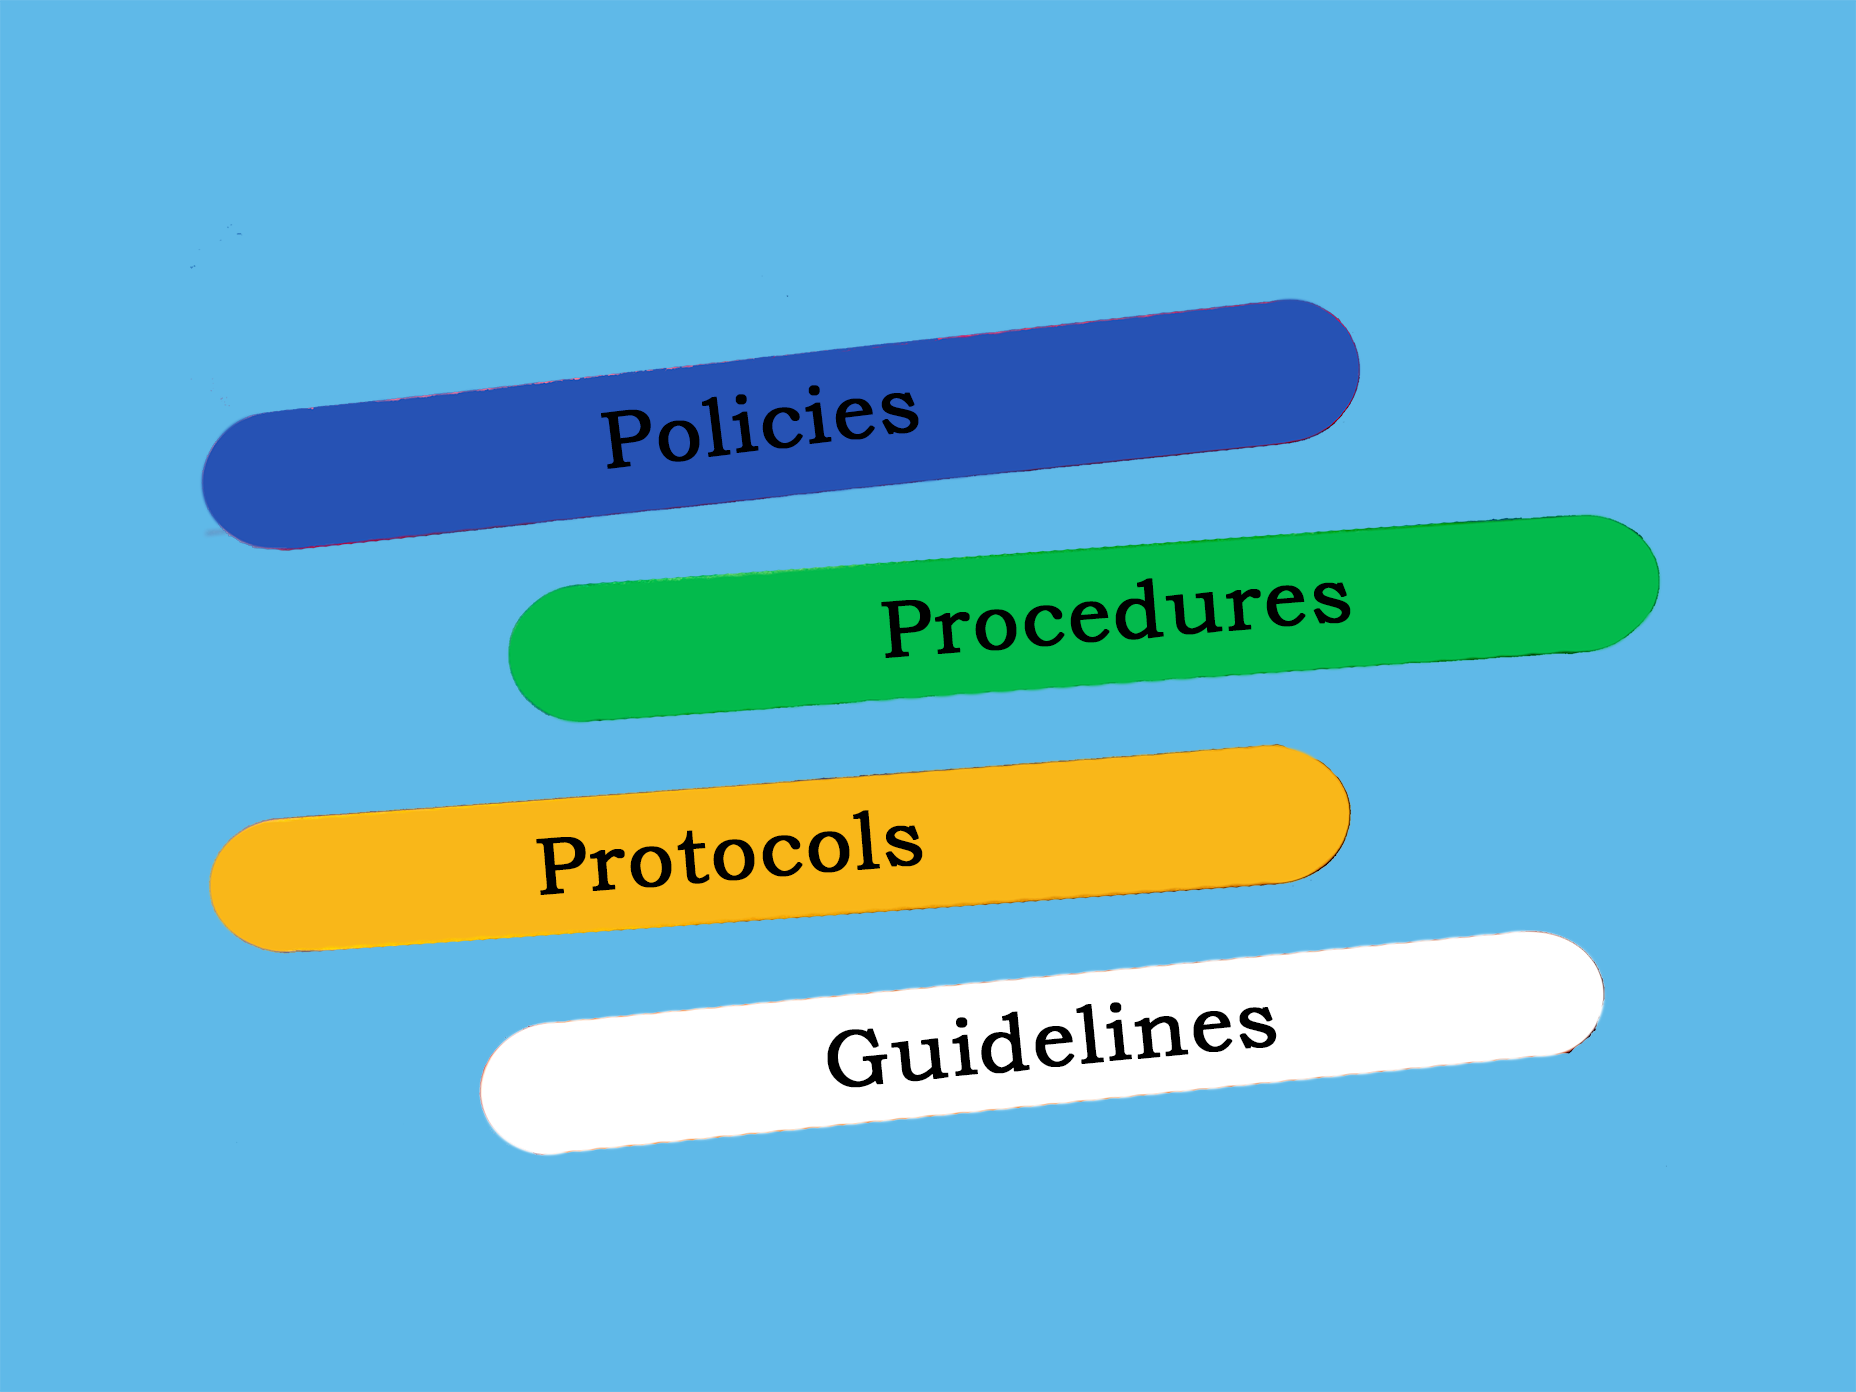 Policies, Procedures, Protocols and Guidelines in Health and Social Care - Dr Richard Dune -.png__PID:a3d9400c-8bac-4de9-96a4-d0b49565d64c